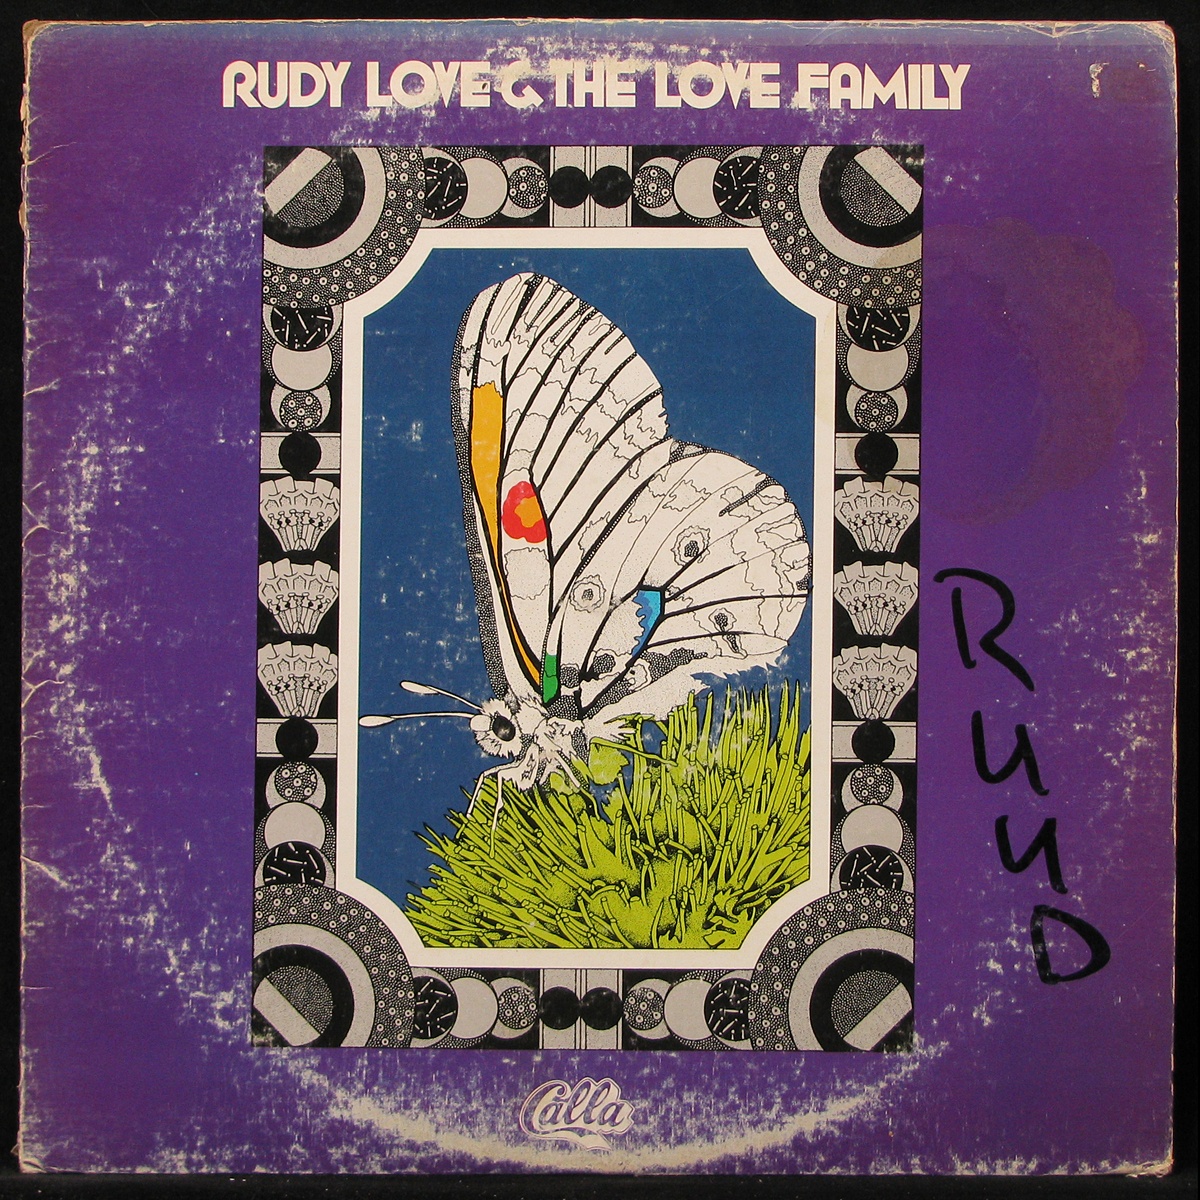 LP Rudy Love & The Love Family — Rudy Love & The Love Family фото